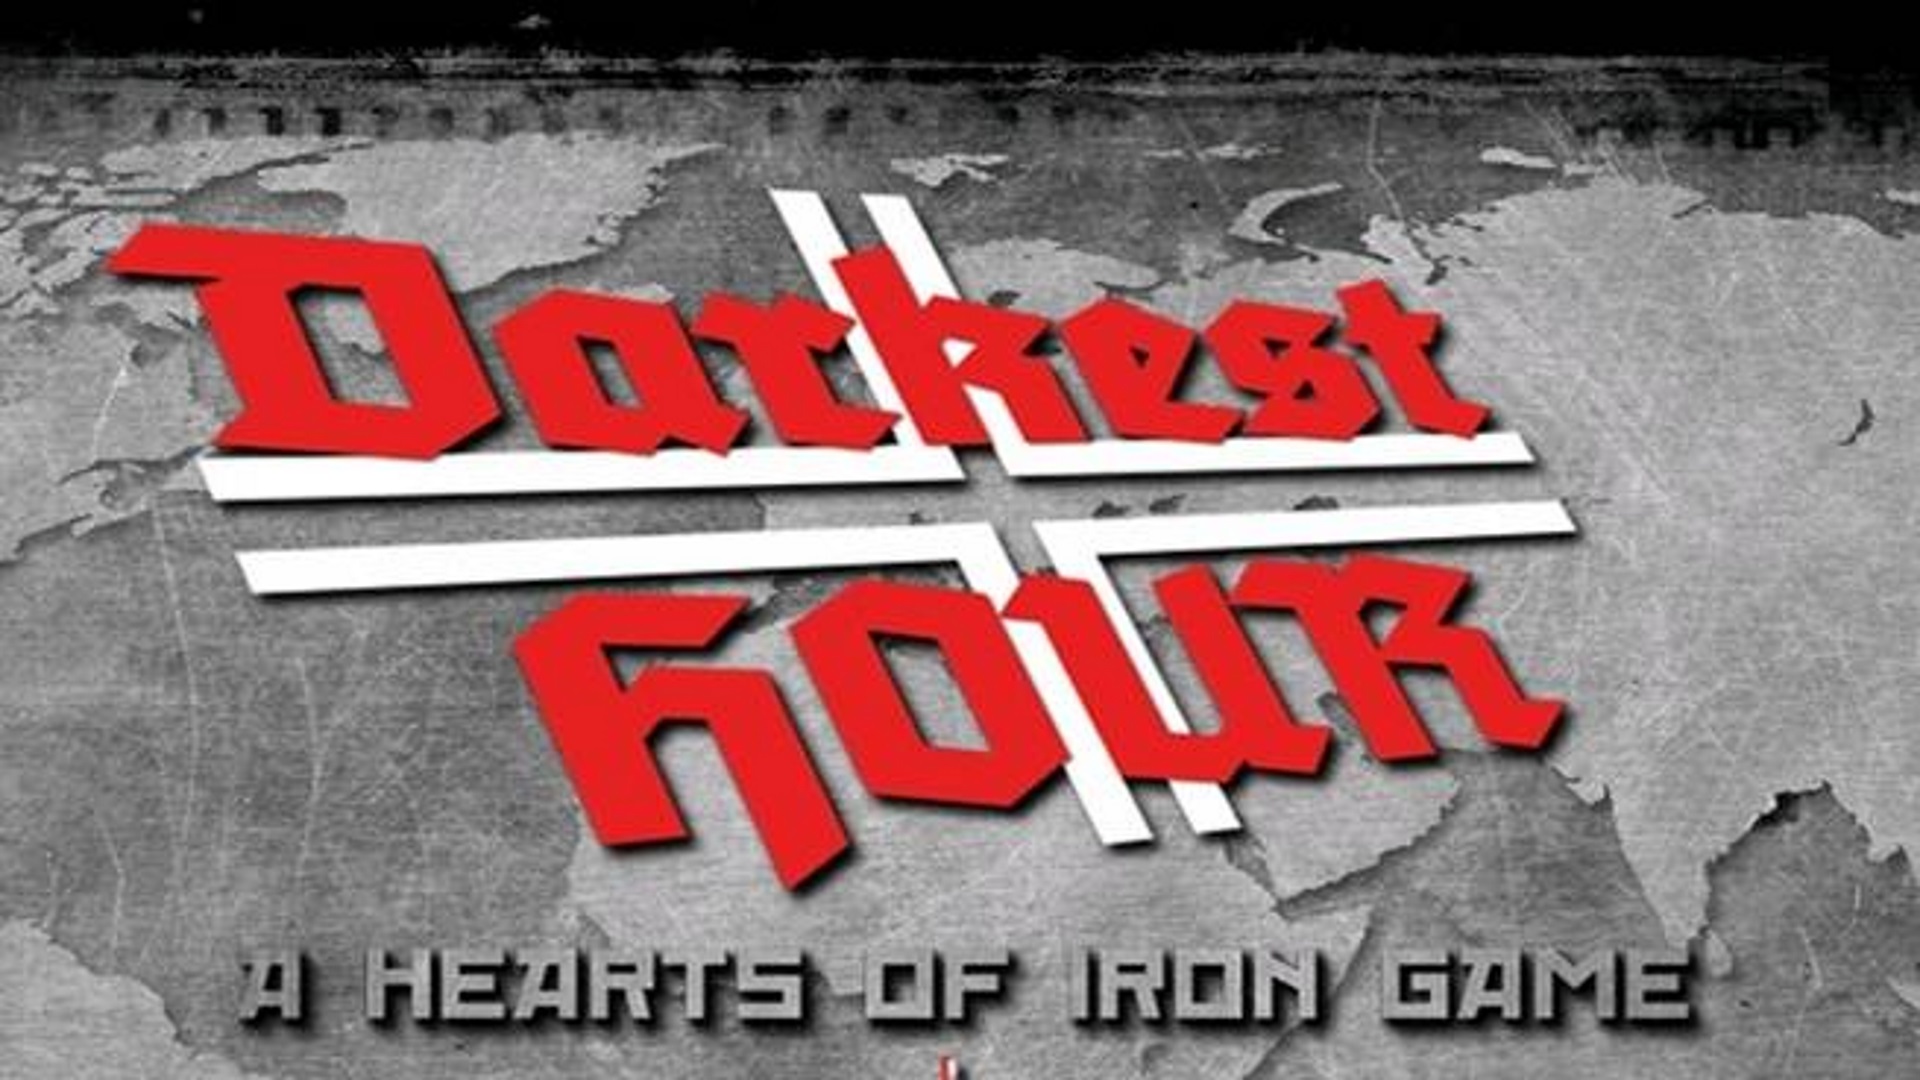 darkest hour a hearts of iron game